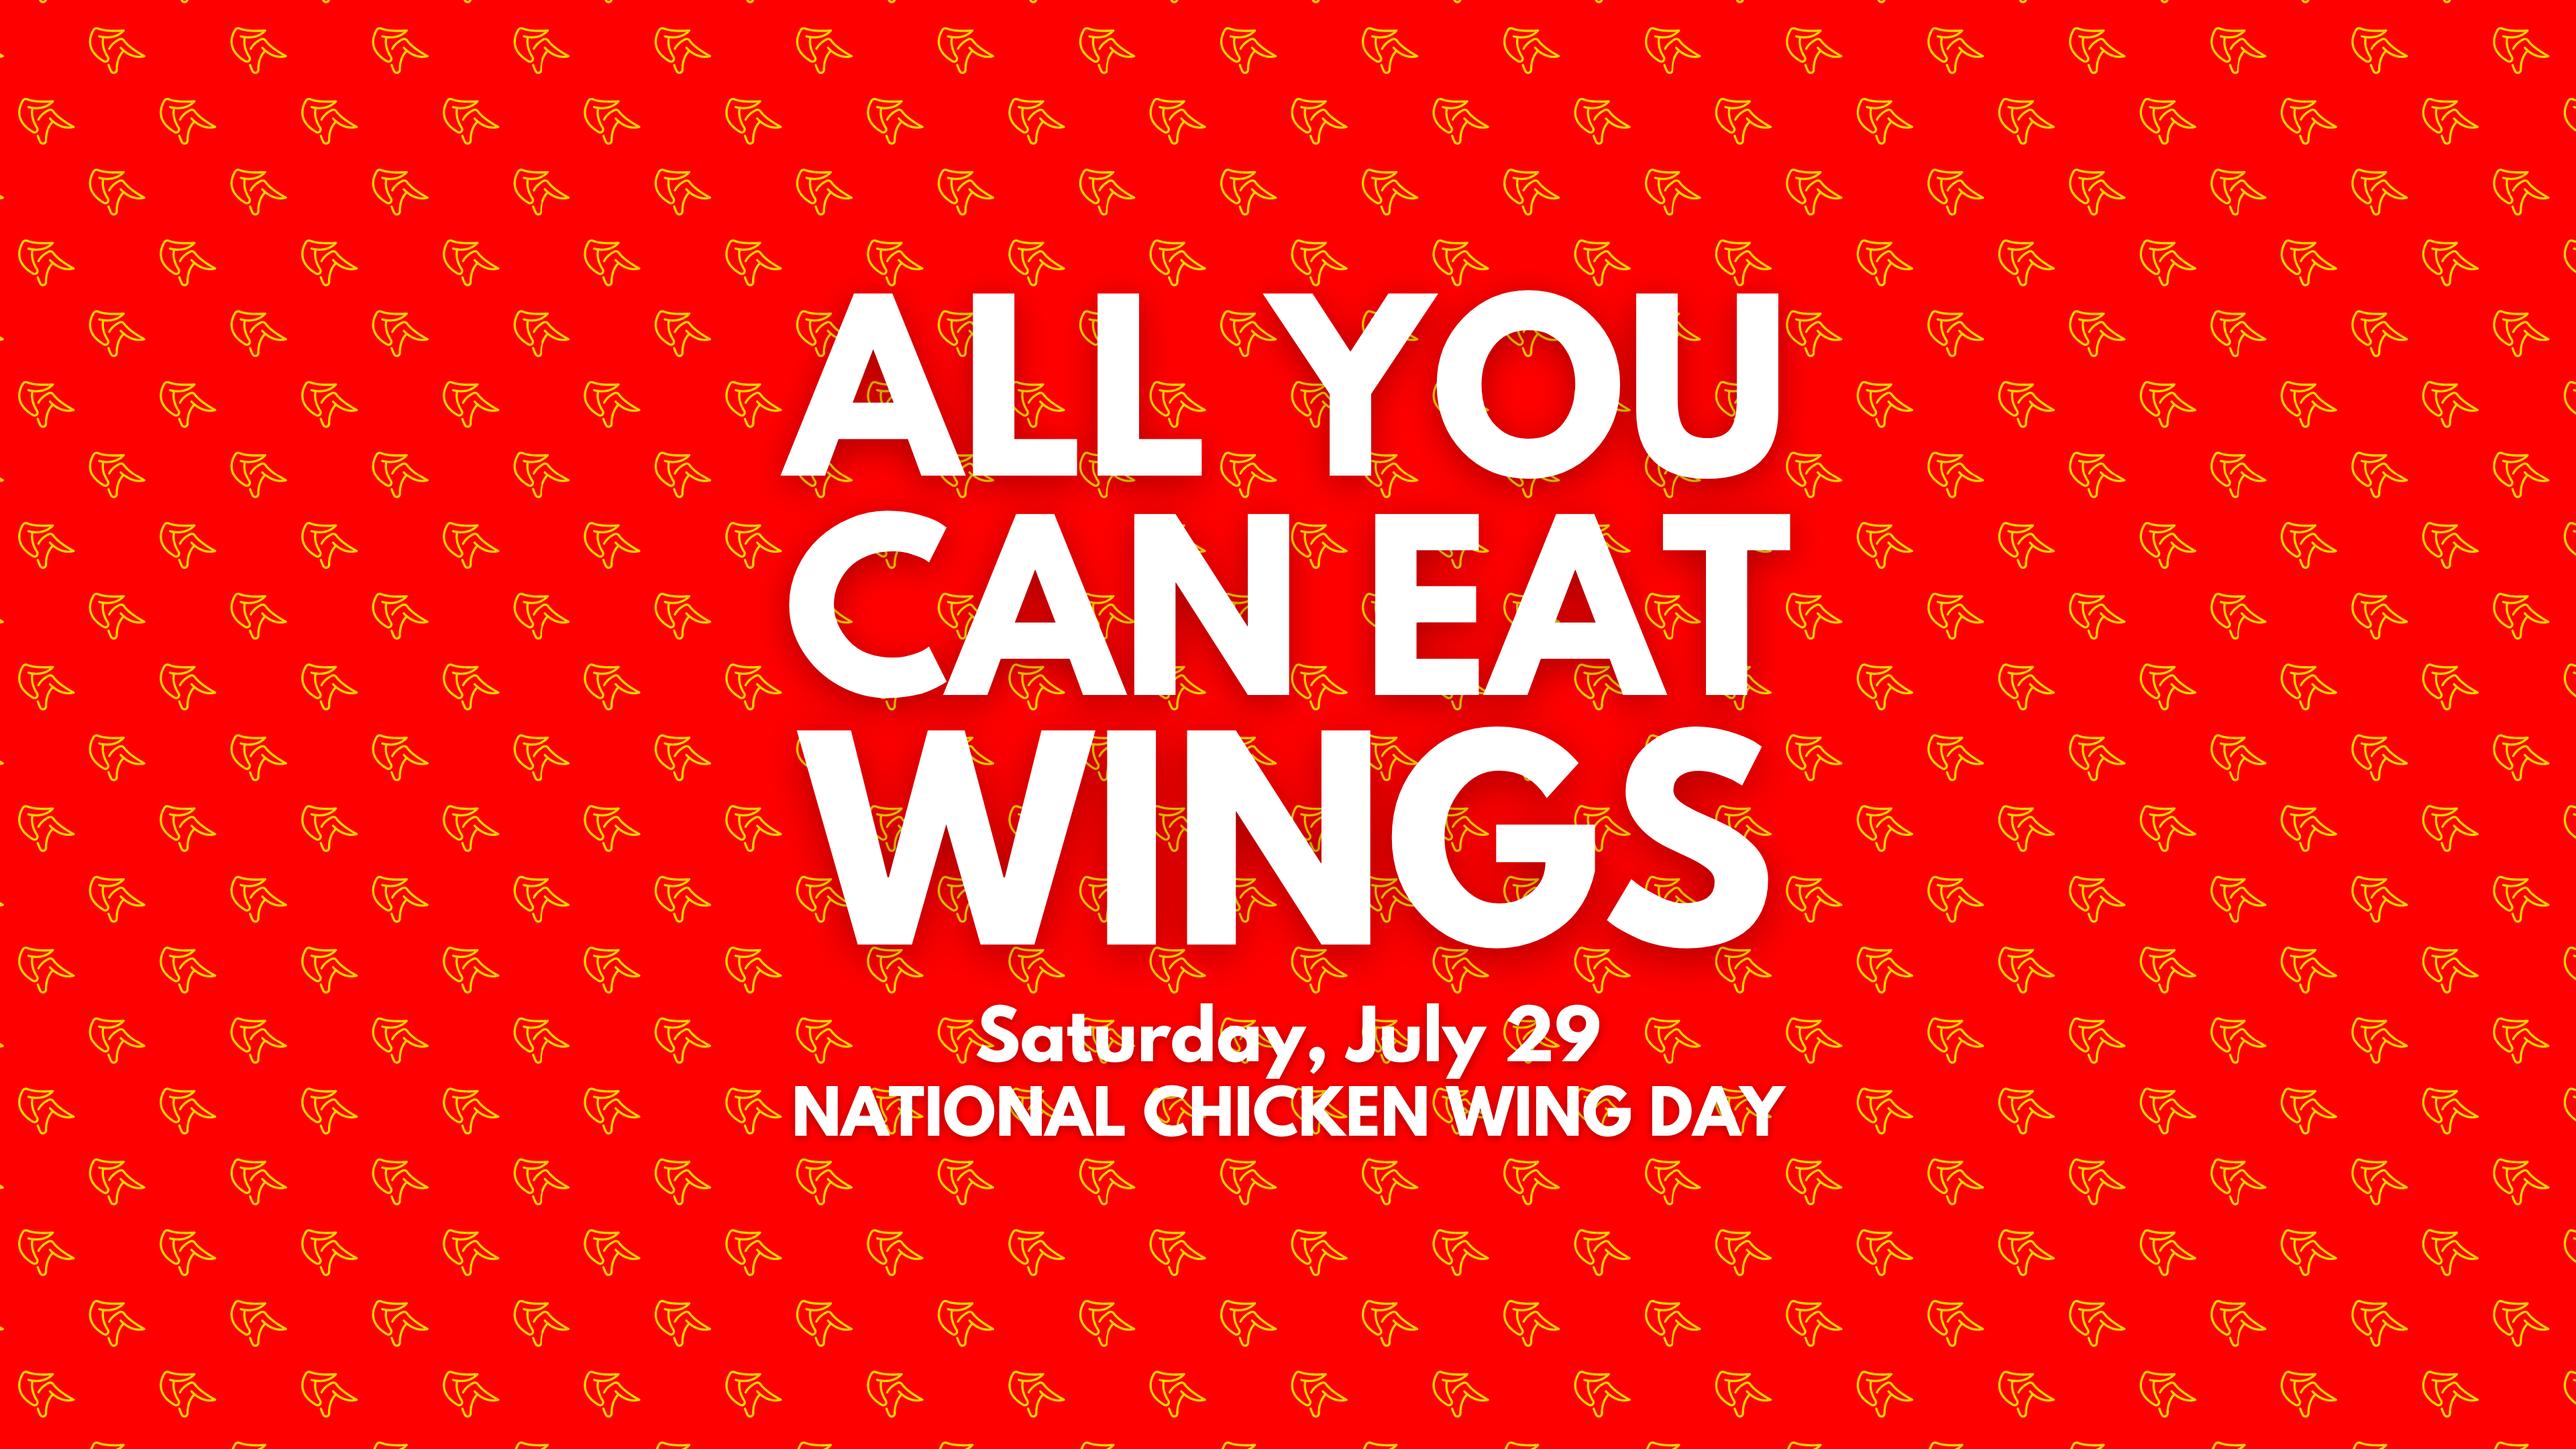 ALL YOU CAN EAT WINGS for National Chicken Wing Day